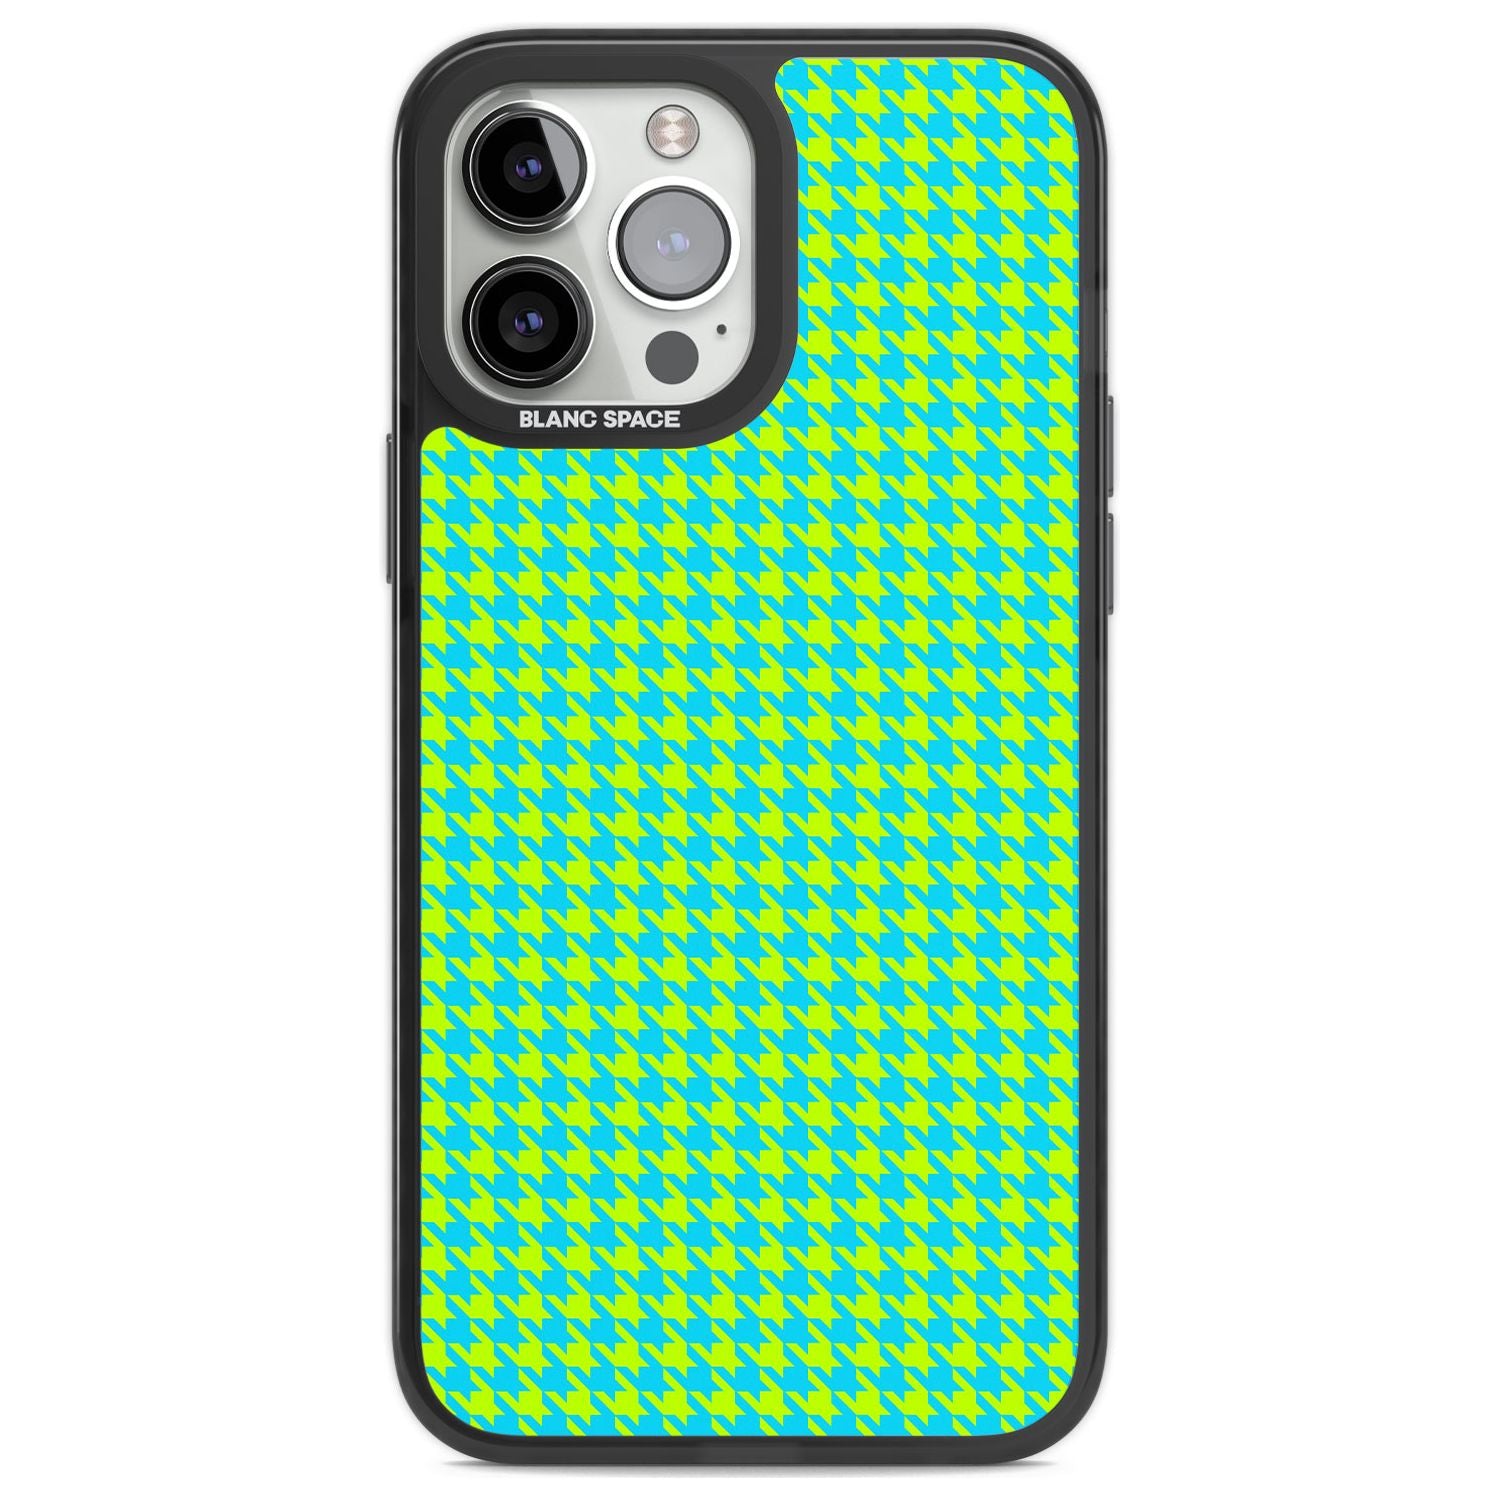 Neon Lime & Turquoise Houndstooth Pattern Phone Case iPhone 13 Pro Max / Black Impact Case,iPhone 14 Pro Max / Black Impact Case Blanc Space